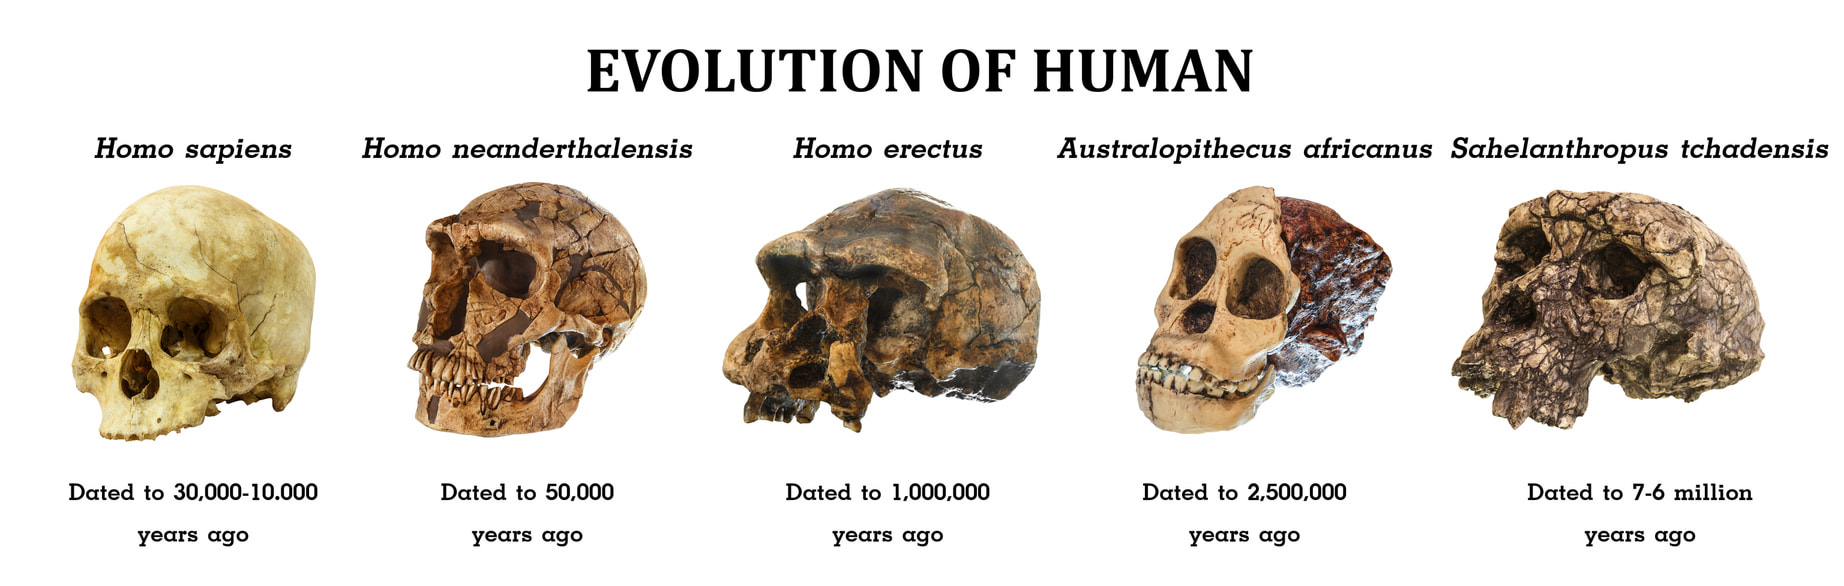 the changes of human evolutions from generation to generation